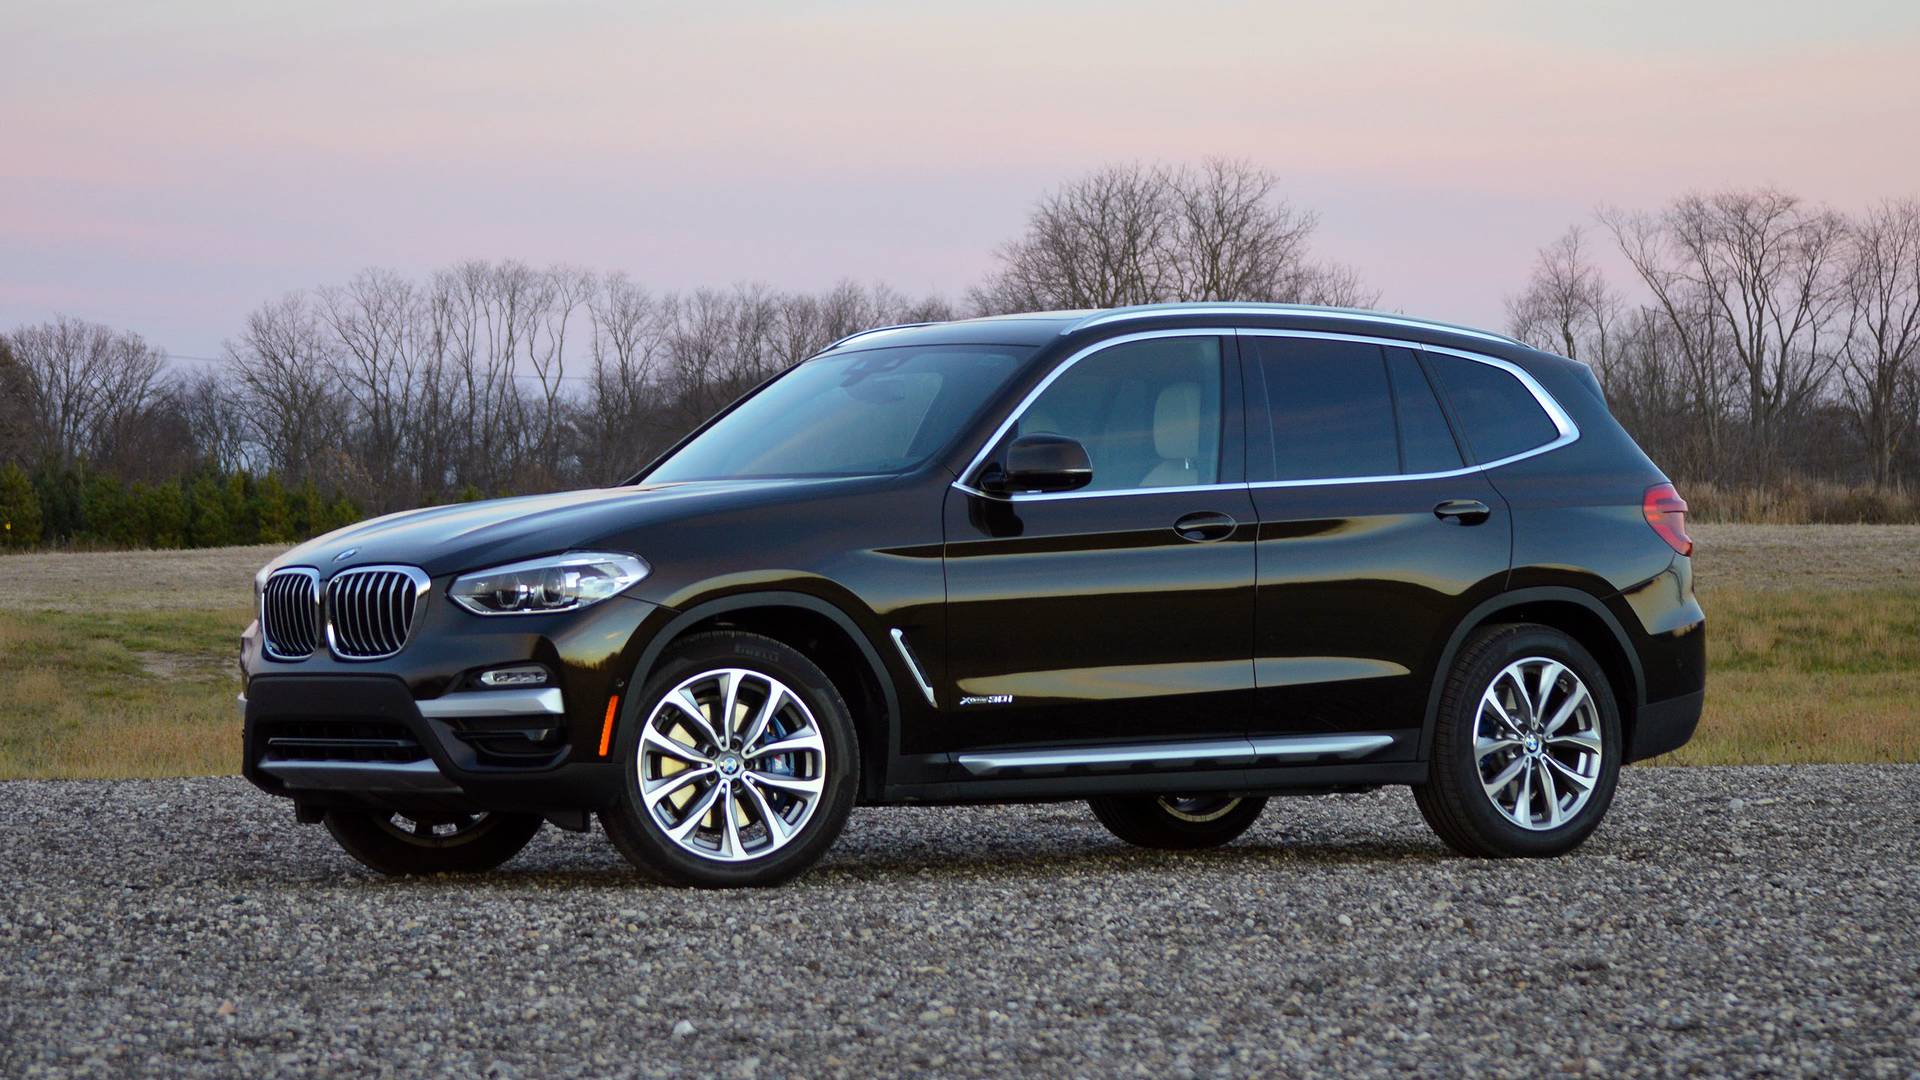 2018 BMW X3 Review: The Lux CUV Segment Gets Deeper